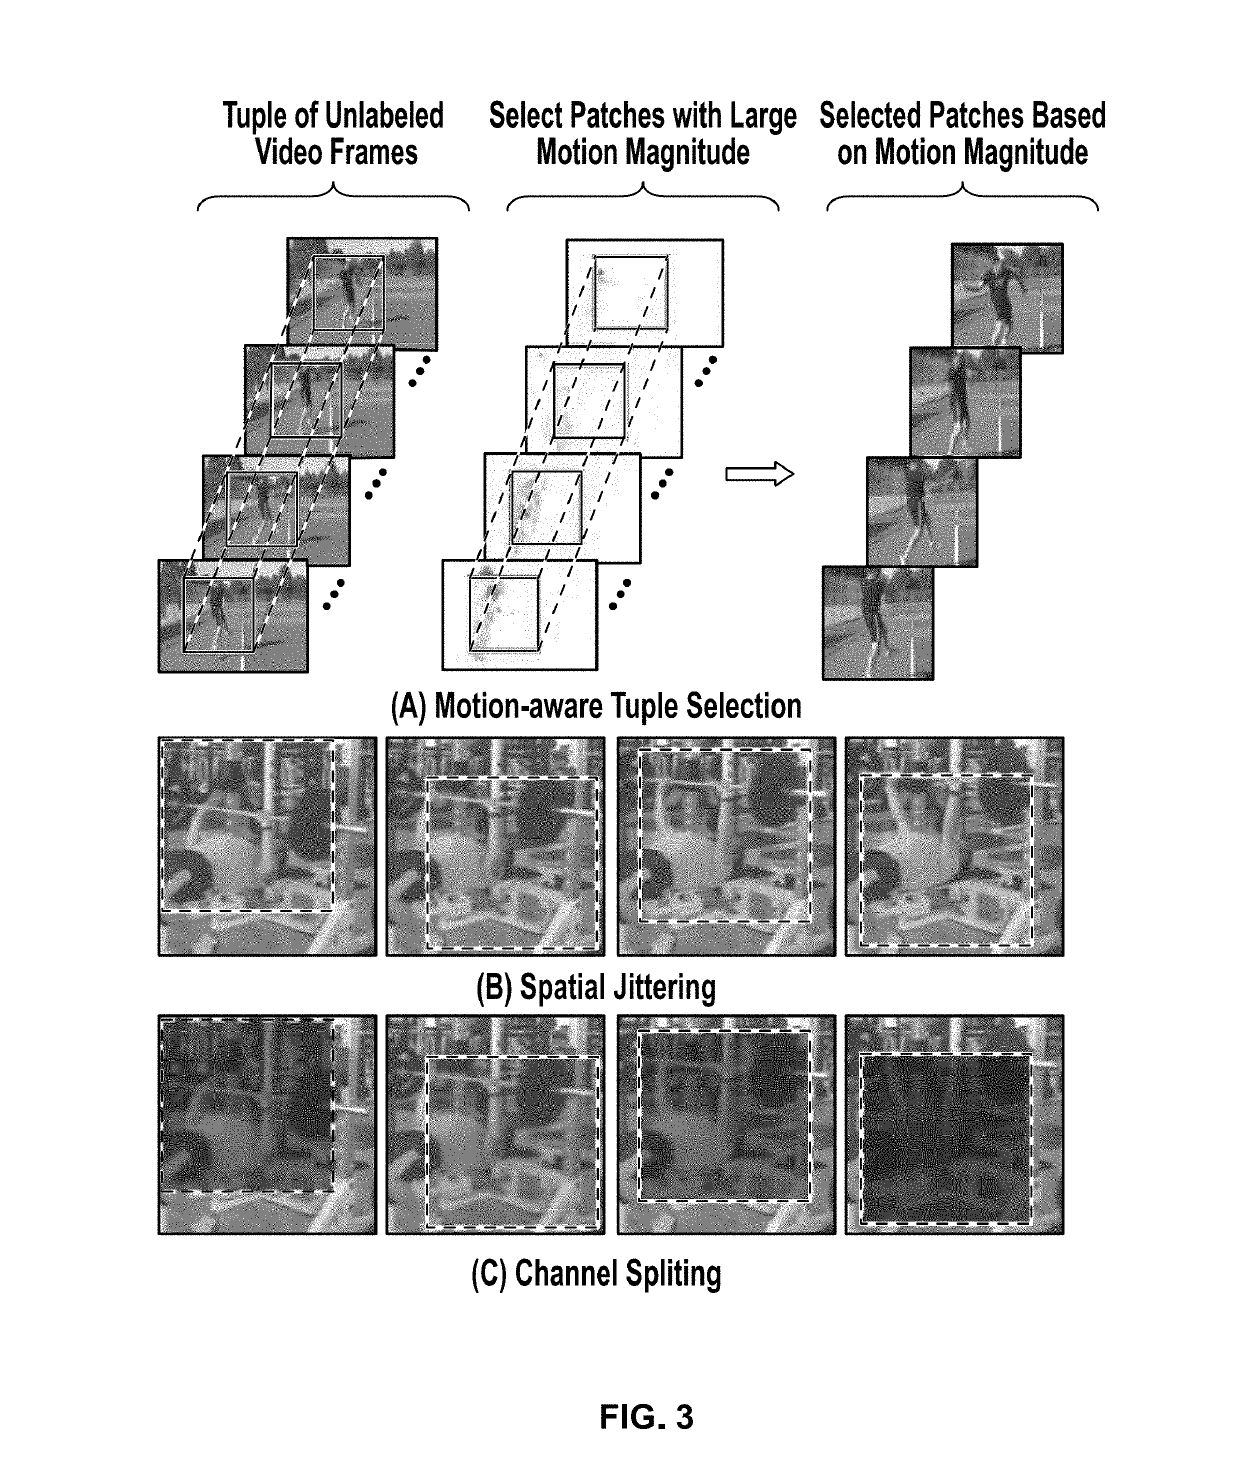 Computer Vision Systems and Methods for Unsupervised Representation Learning by Sorting Sequences